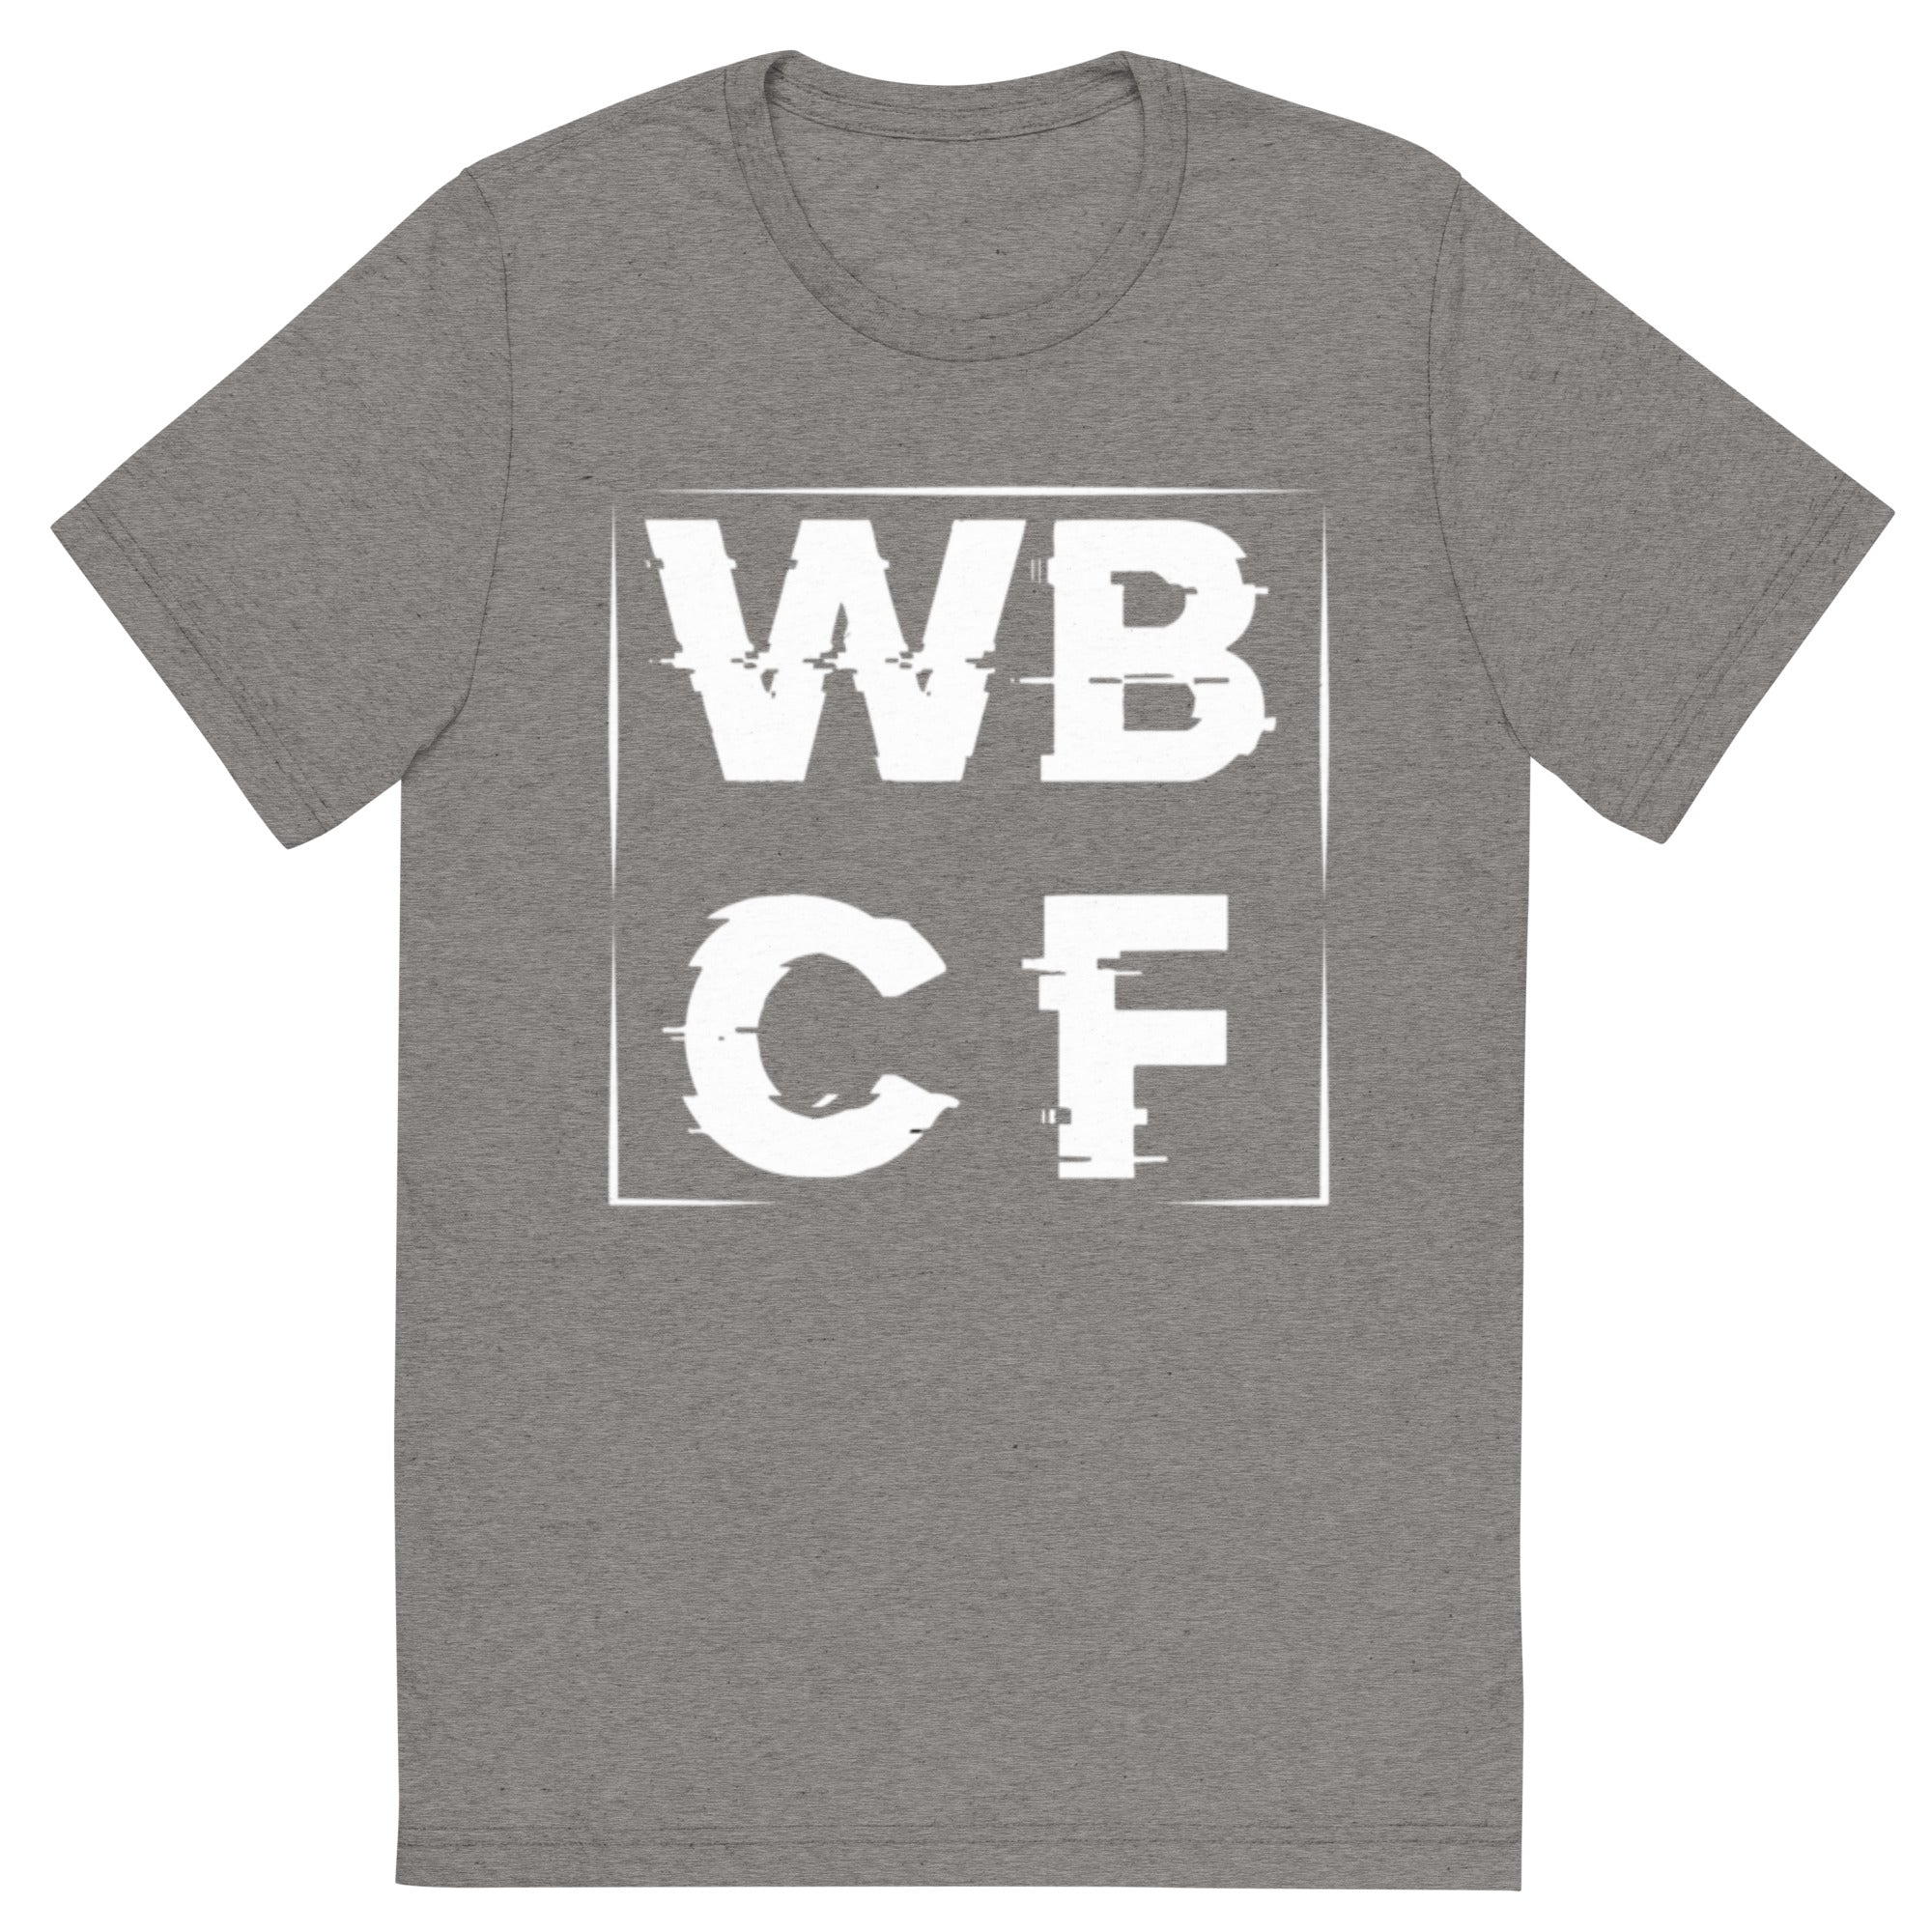 WBCF Shattered Text